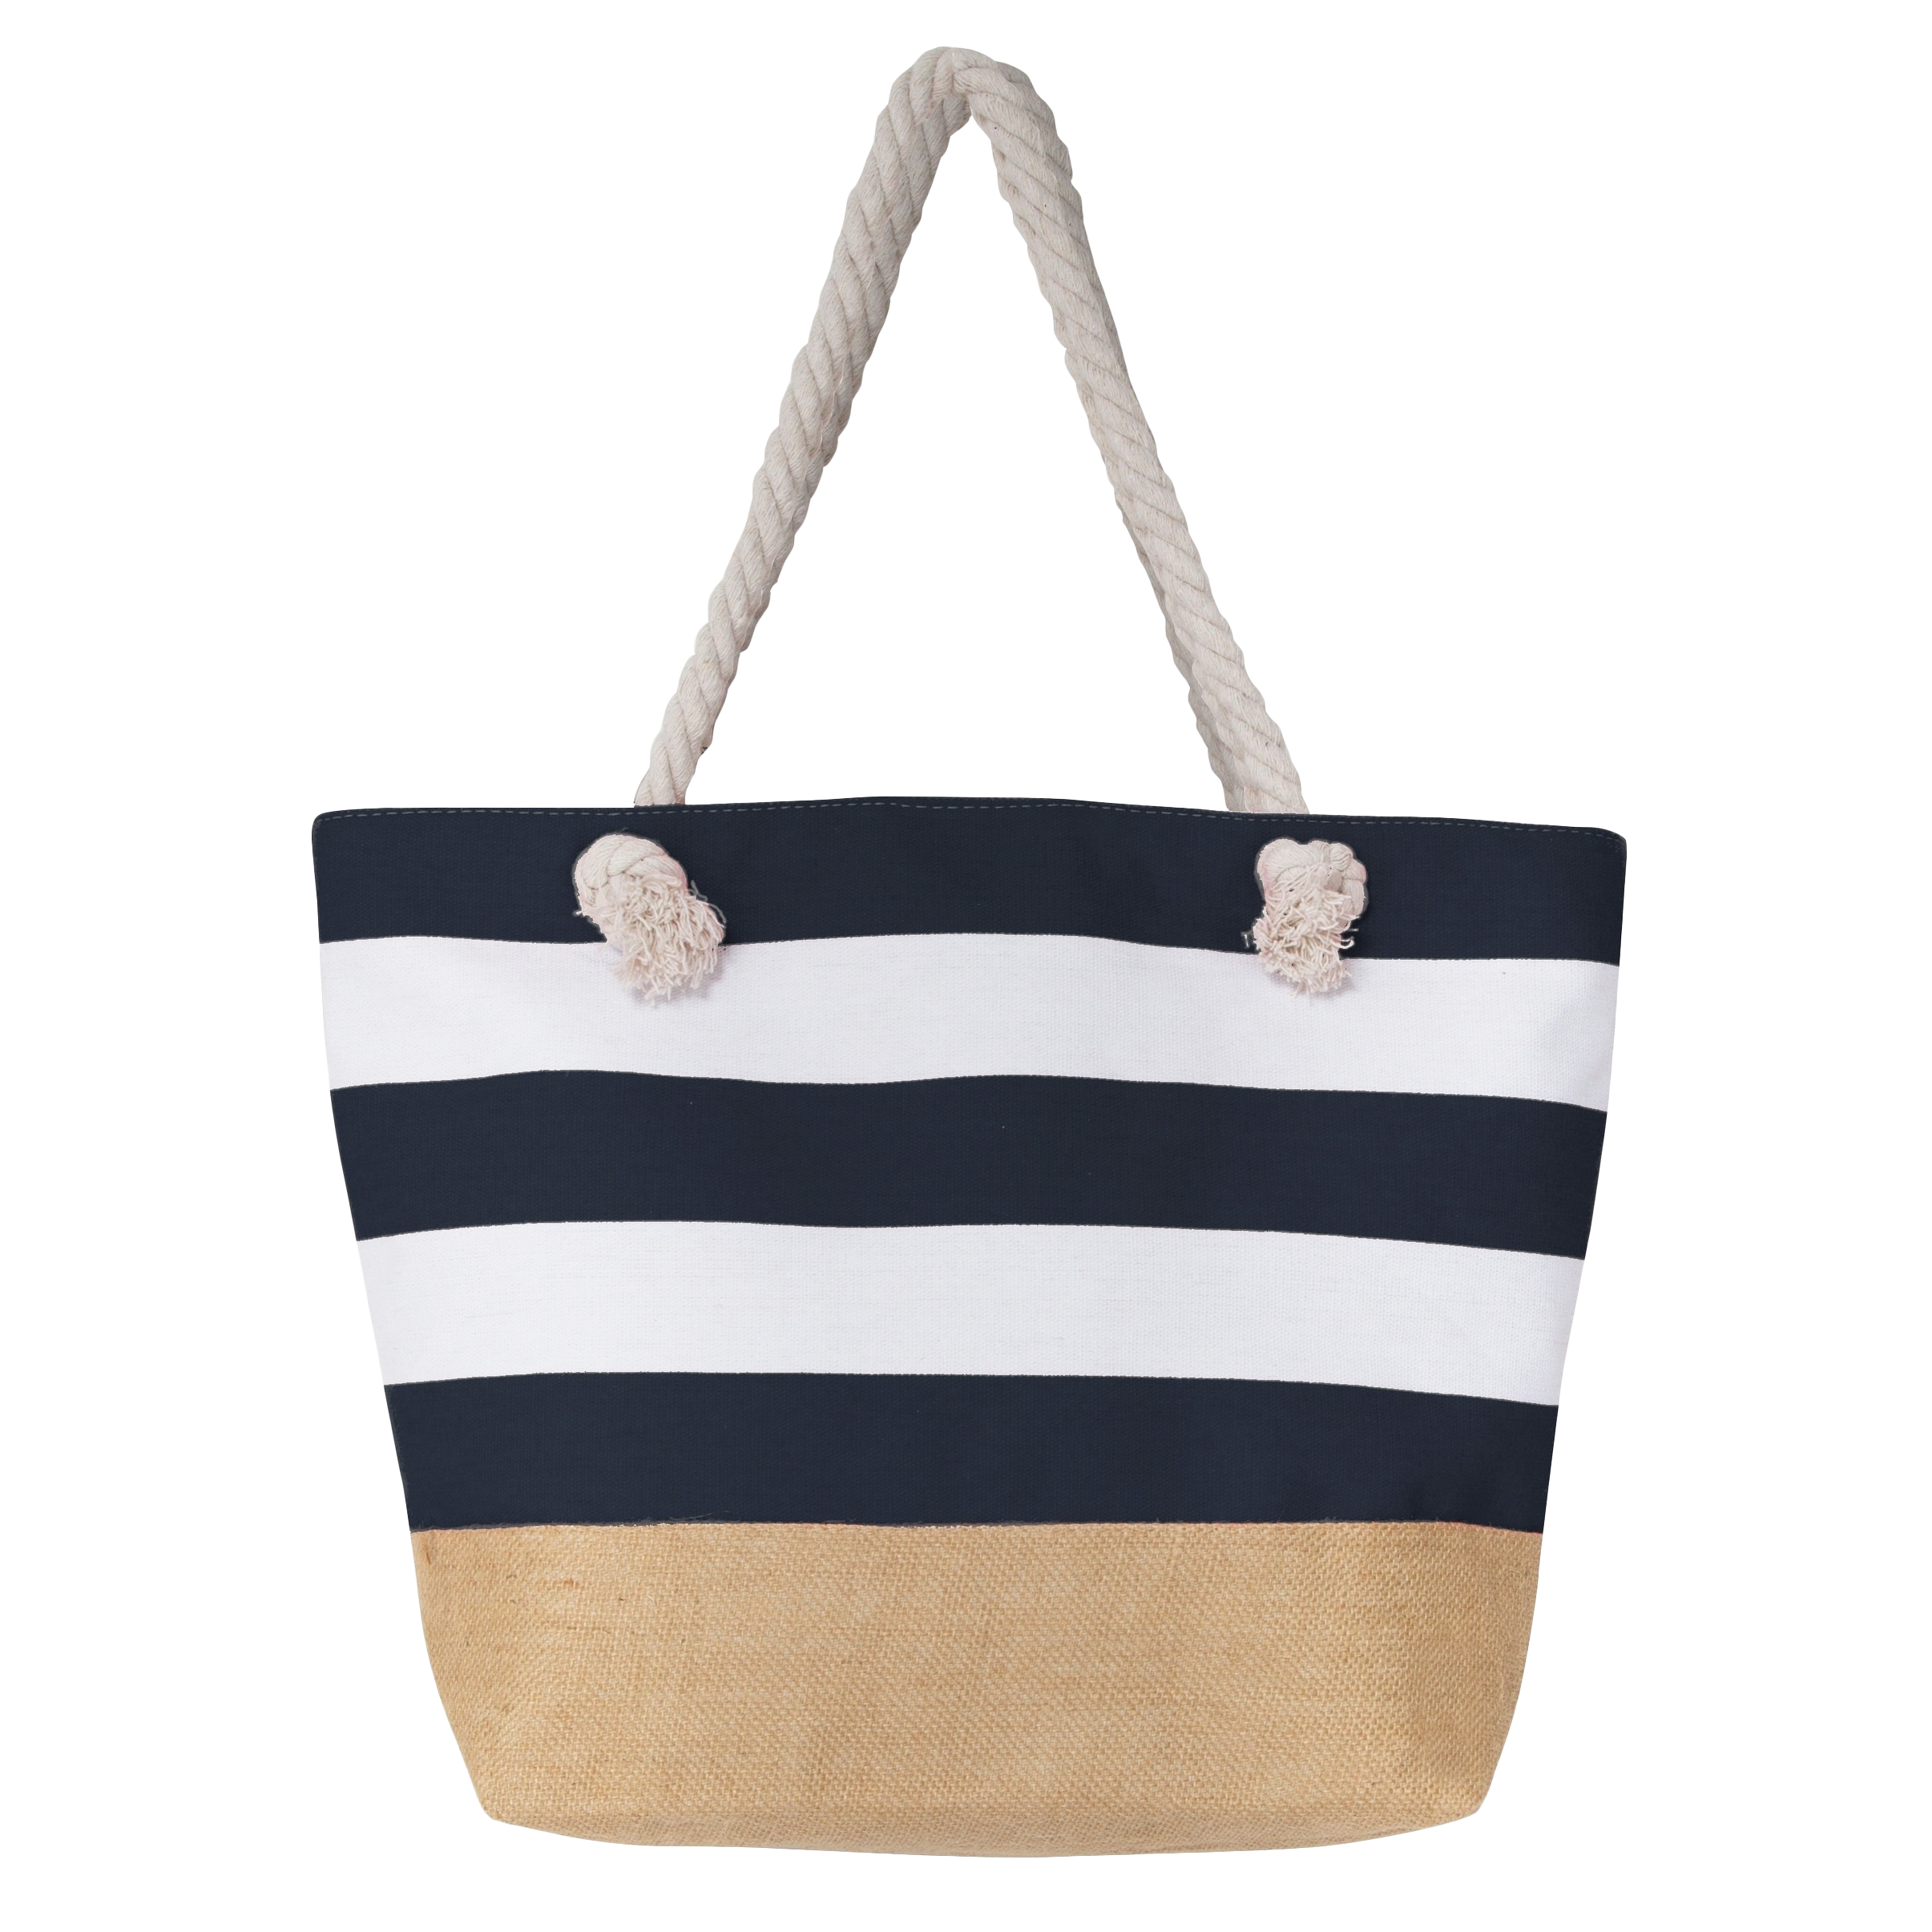 Canvas bags manufacturers in India